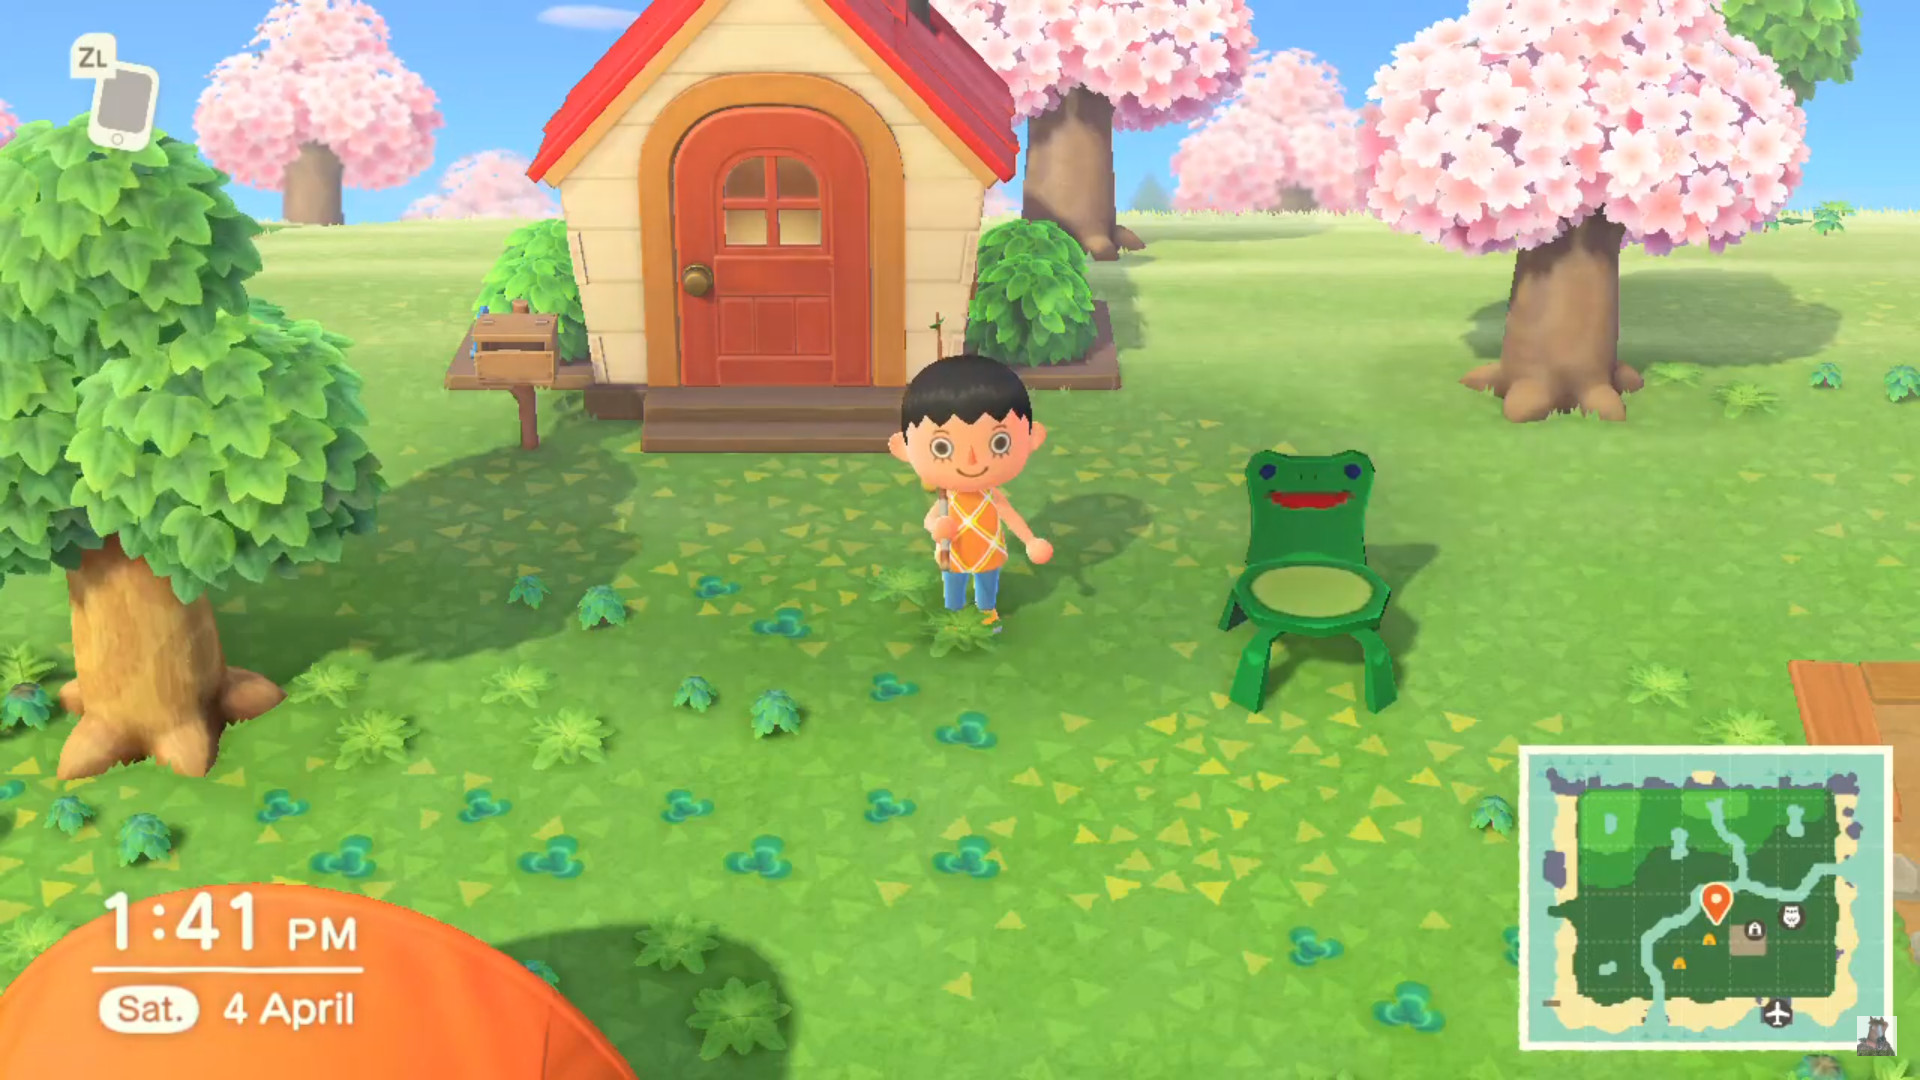 Froggy Chair Animal Crossing New Horizons Mods